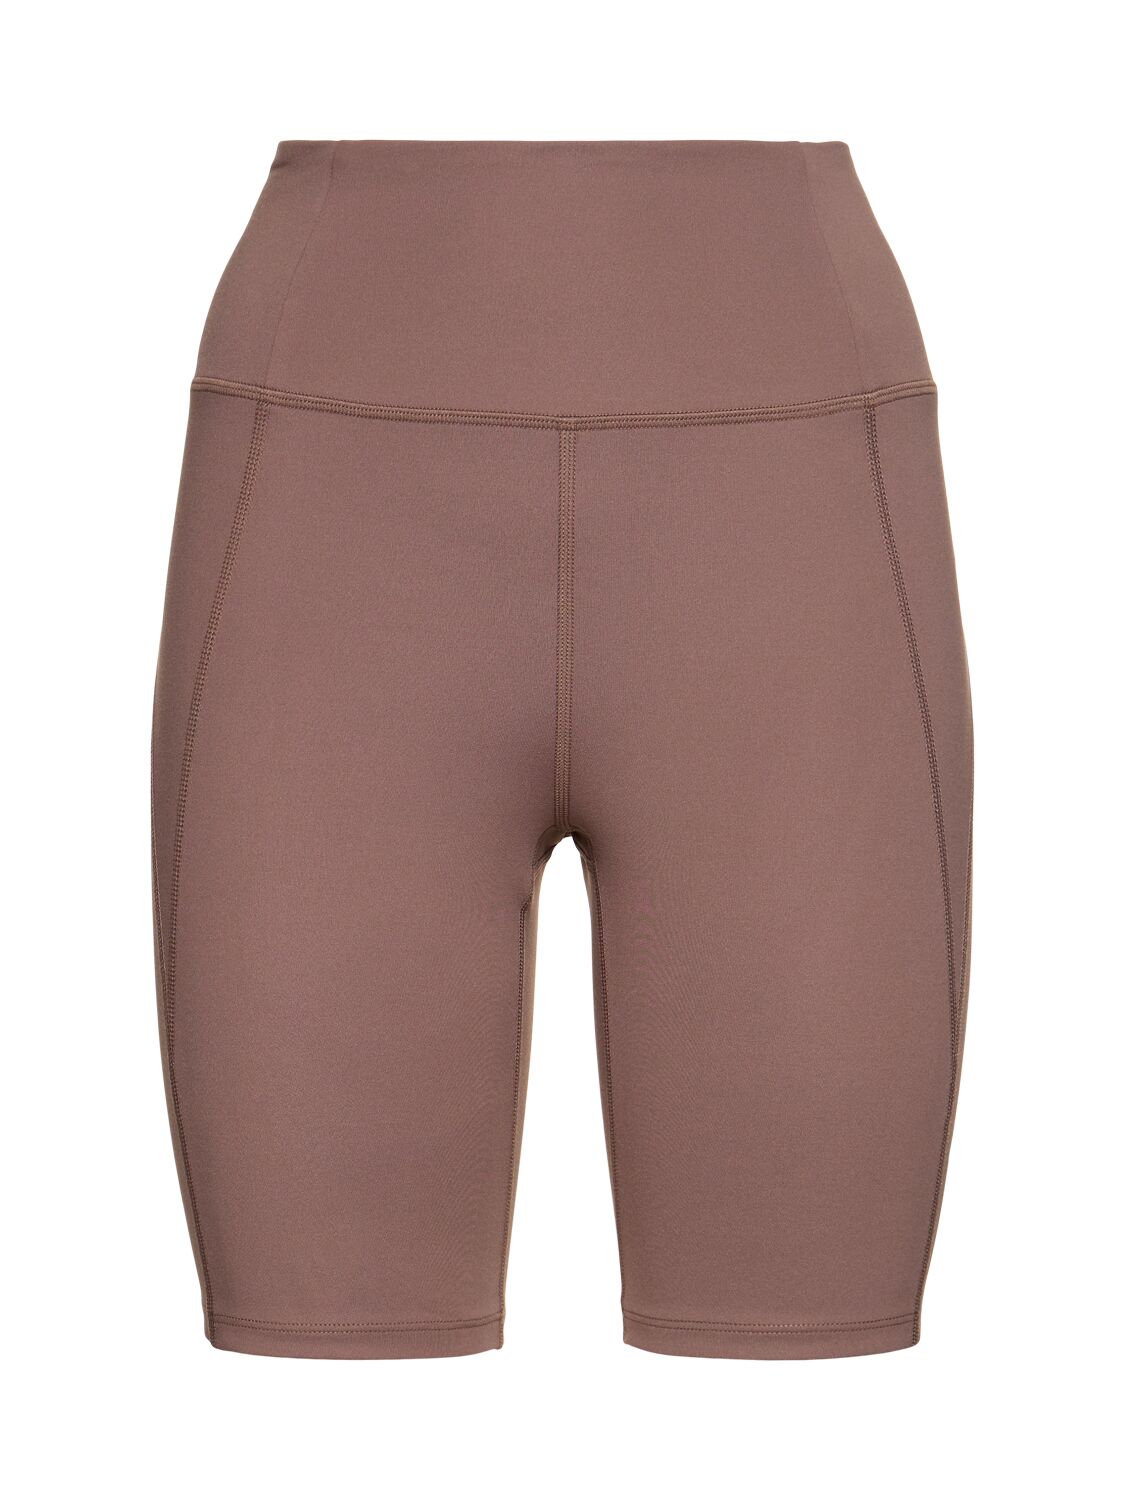 Girlfriend Collective High Rise Stretch Tech Running Shorts In Brown